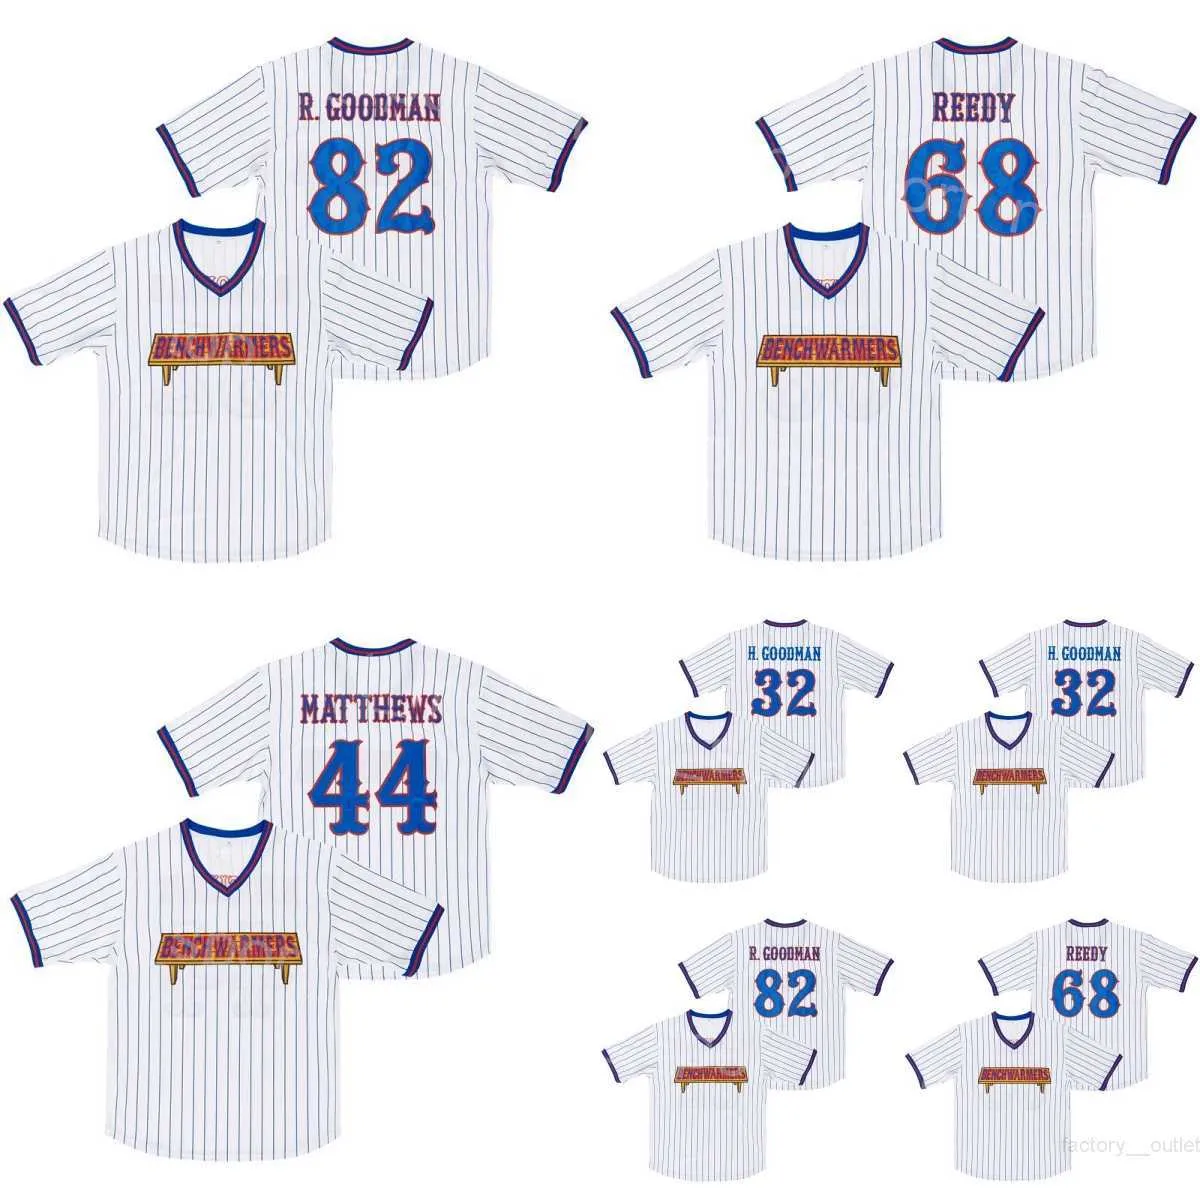 Benchwarmers Jersey Moive Baseball 44 Gus Matthews 68 Clark Reedy 82 Richie Goodman 32 Howie Goodman Pinstriped White Breathable For Sport Fans Stitched Cool Base